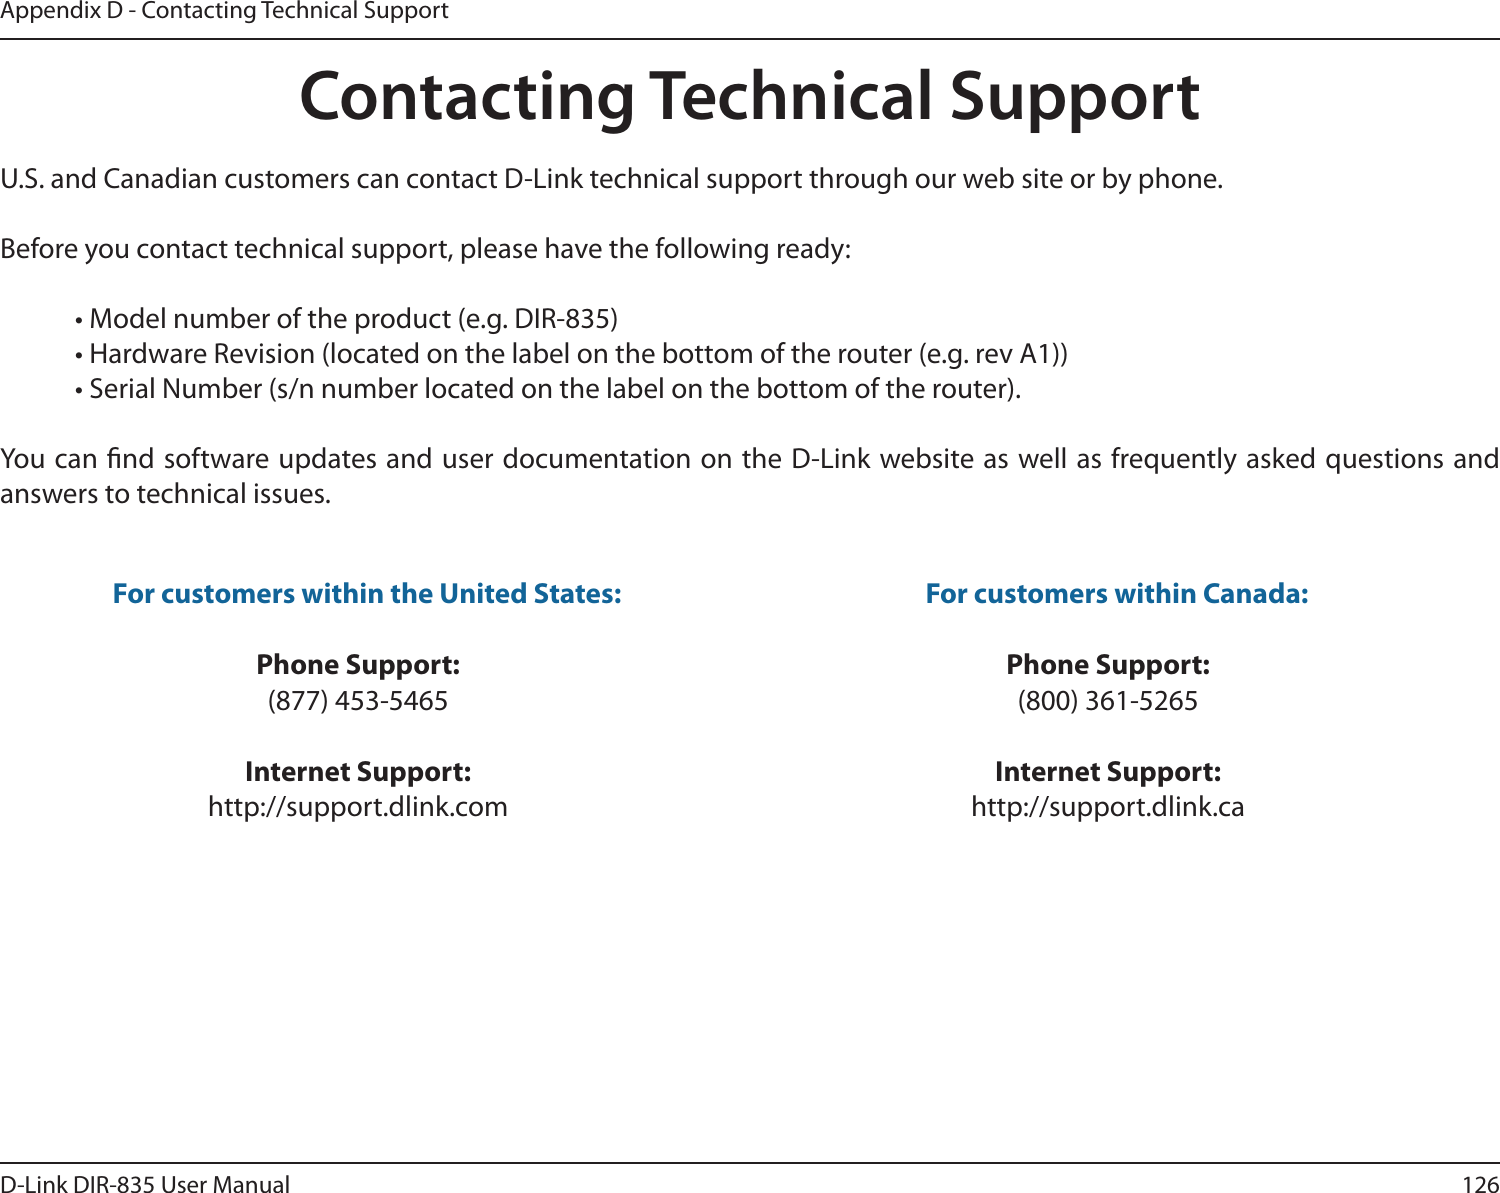 126D-Link DIR-835 User ManualAppendix D - Contacting Technical SupportContacting Technical SupportU.S. and Canadian customers can contact D-Link technical support through our web site or by phone.Before you contact technical support, please have the following ready:  • Model number of the product (e.g. DIR-835)  • Hardware Revision (located on the label on the bottom of the router (e.g. rev A1))  • Serial Number (s/n number located on the label on the bottom of the router). You can nd software updates and user documentation on the D-Link website as well as frequently asked questions and answers to technical issues.For customers within the United States: Phone Support:(877) 453-5465Internet Support:http://support.dlink.com For customers within Canada: Phone Support:(800) 361-5265Internet Support:http://support.dlink.ca 